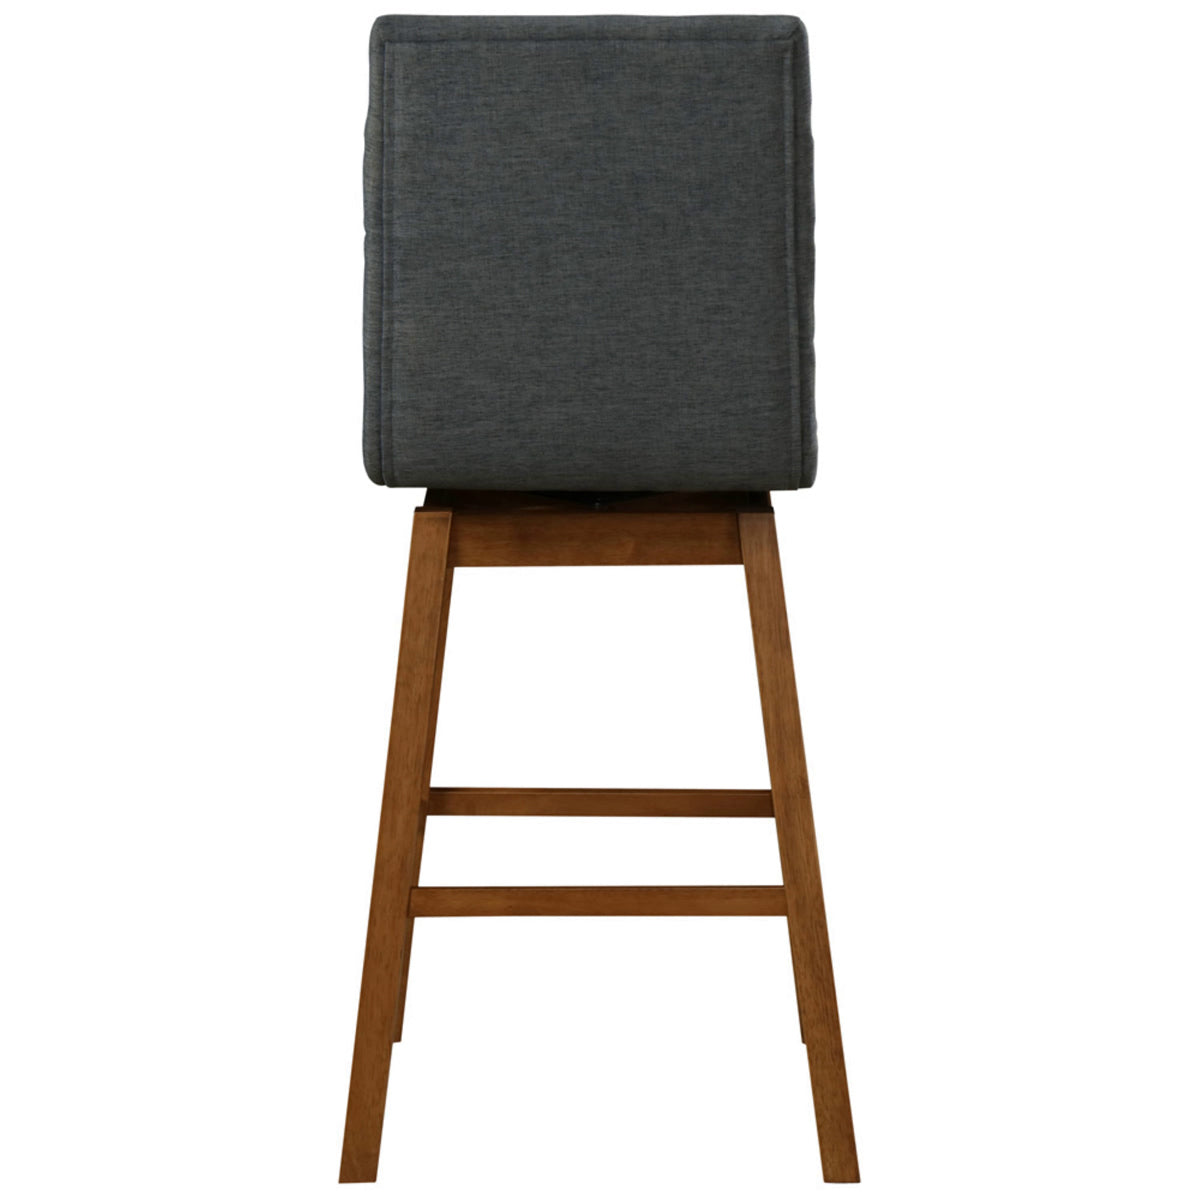 Cliford Fabric Swivel Bar Stool - Set of 2 by New Pacific Direct - 1310003-384